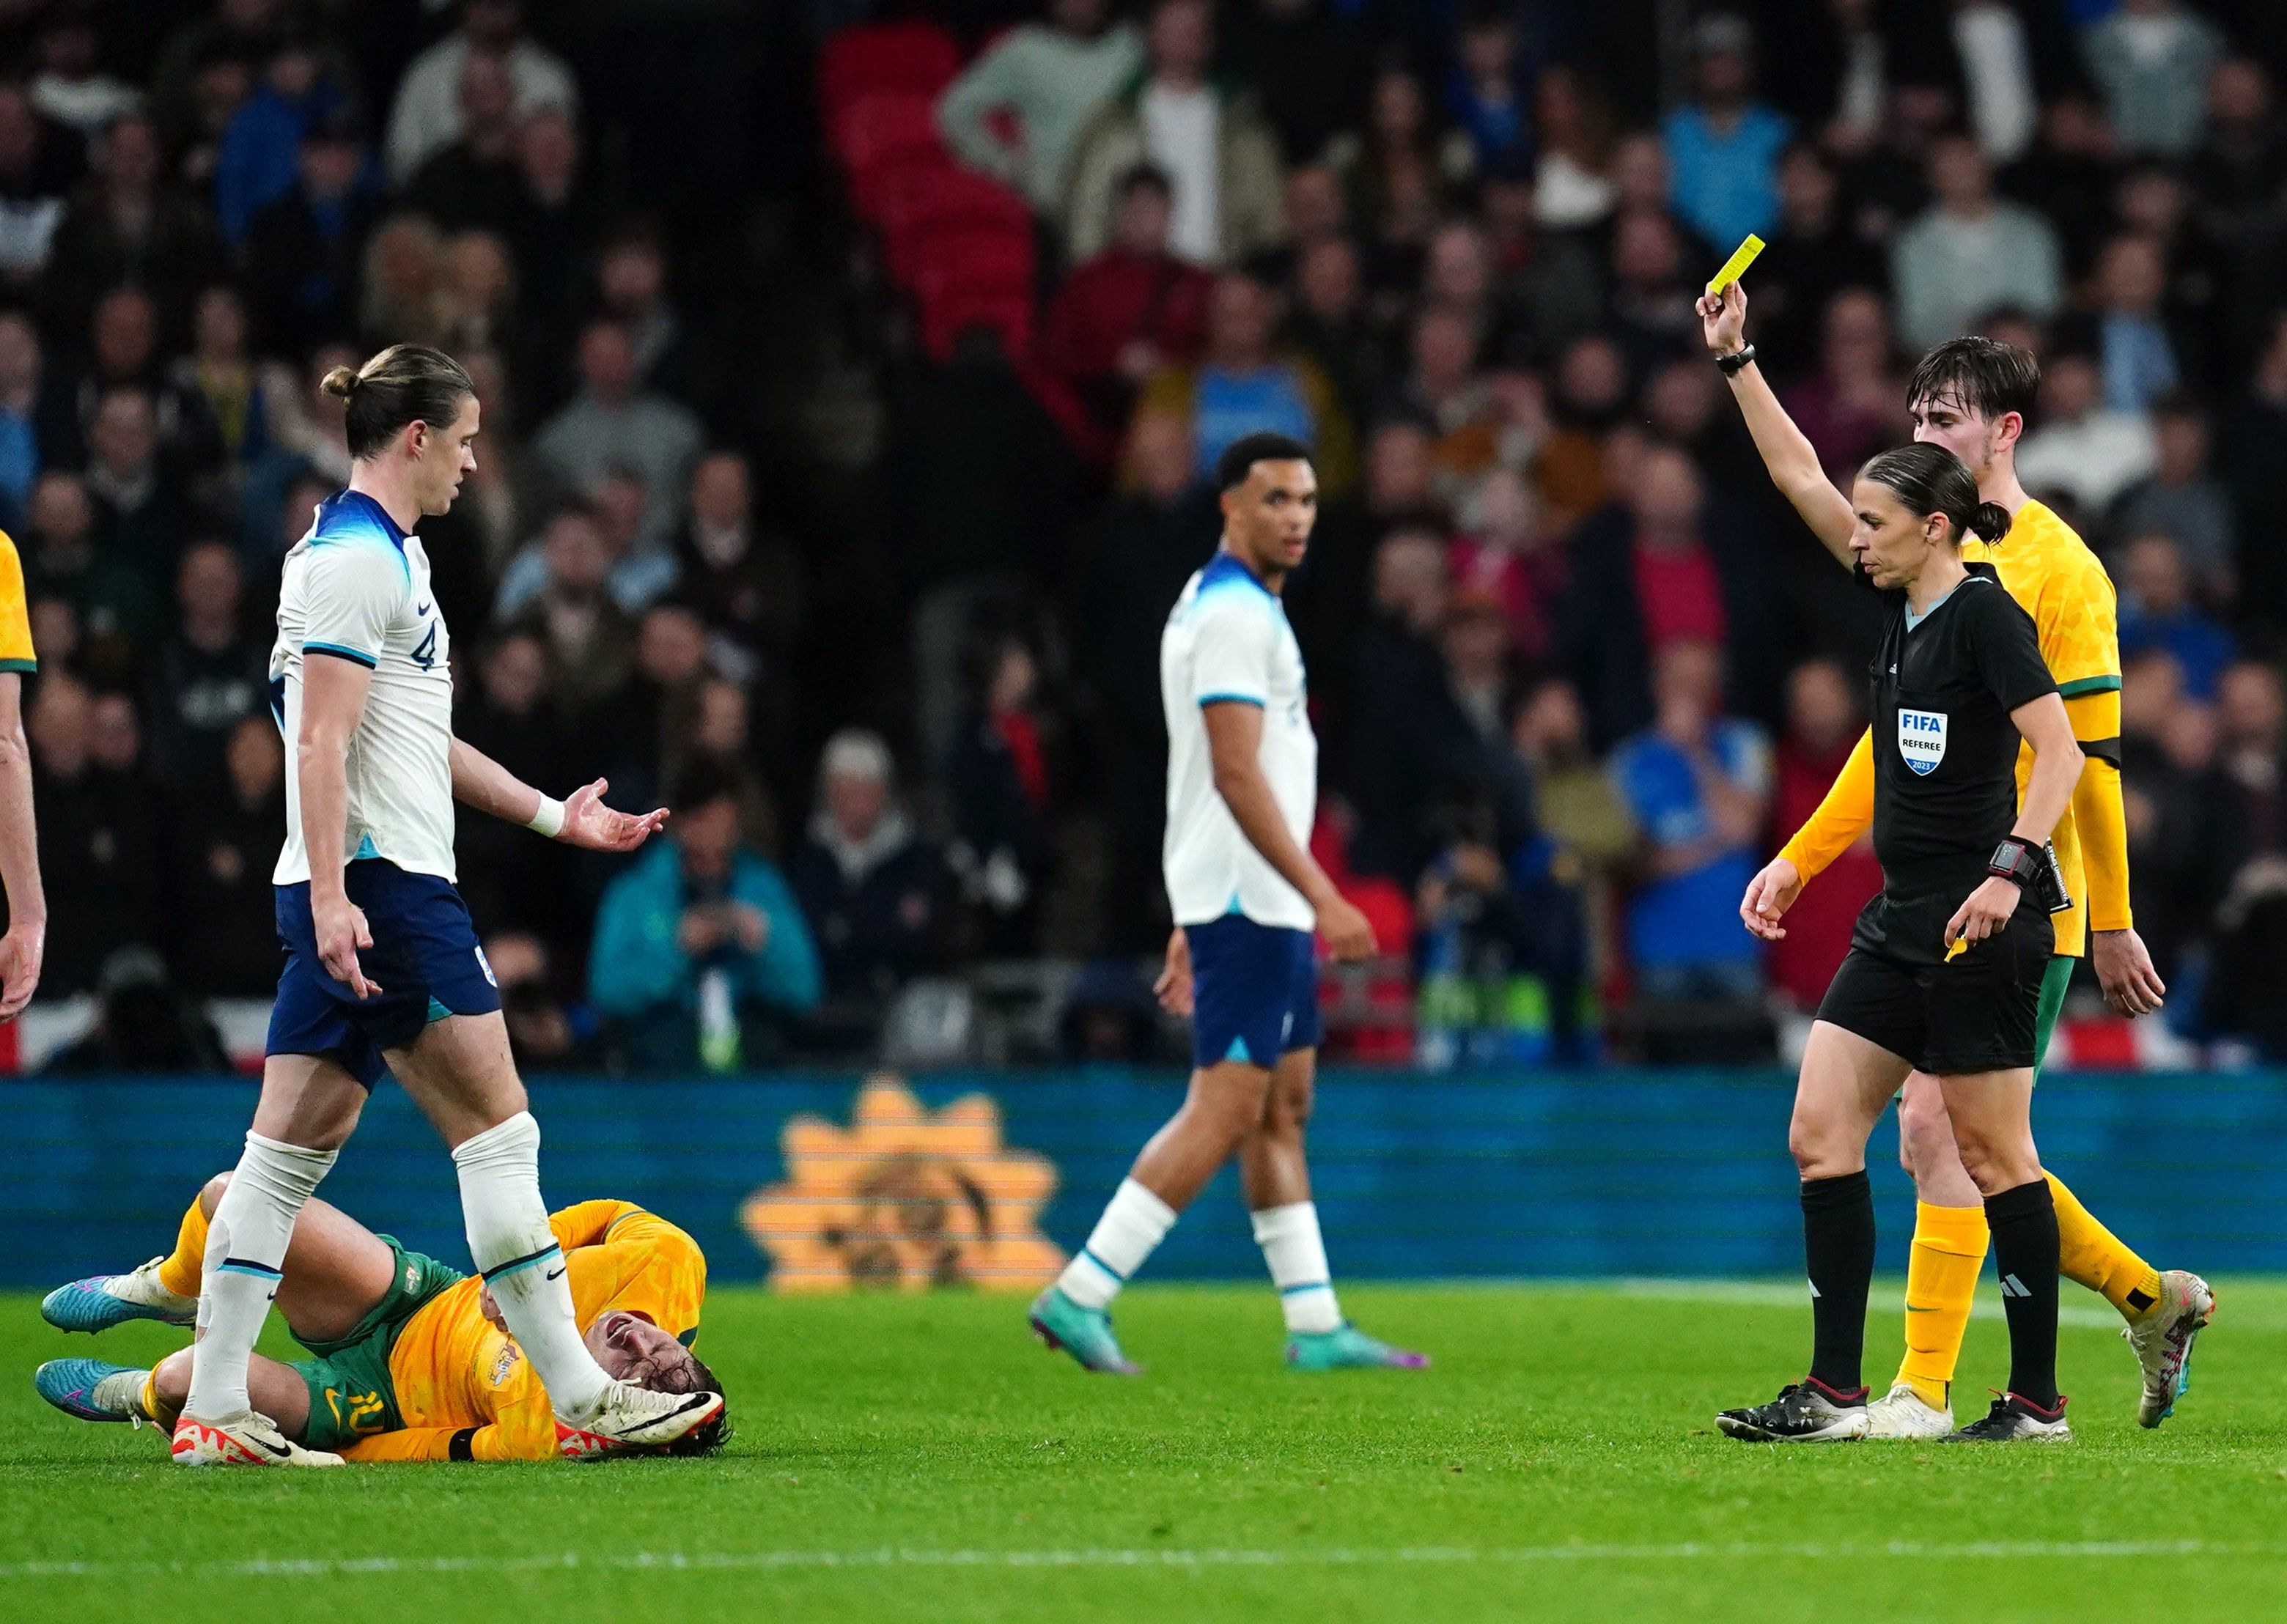 Referee Stephanie Frappart shows a yellow card to England's Conor Gallagher